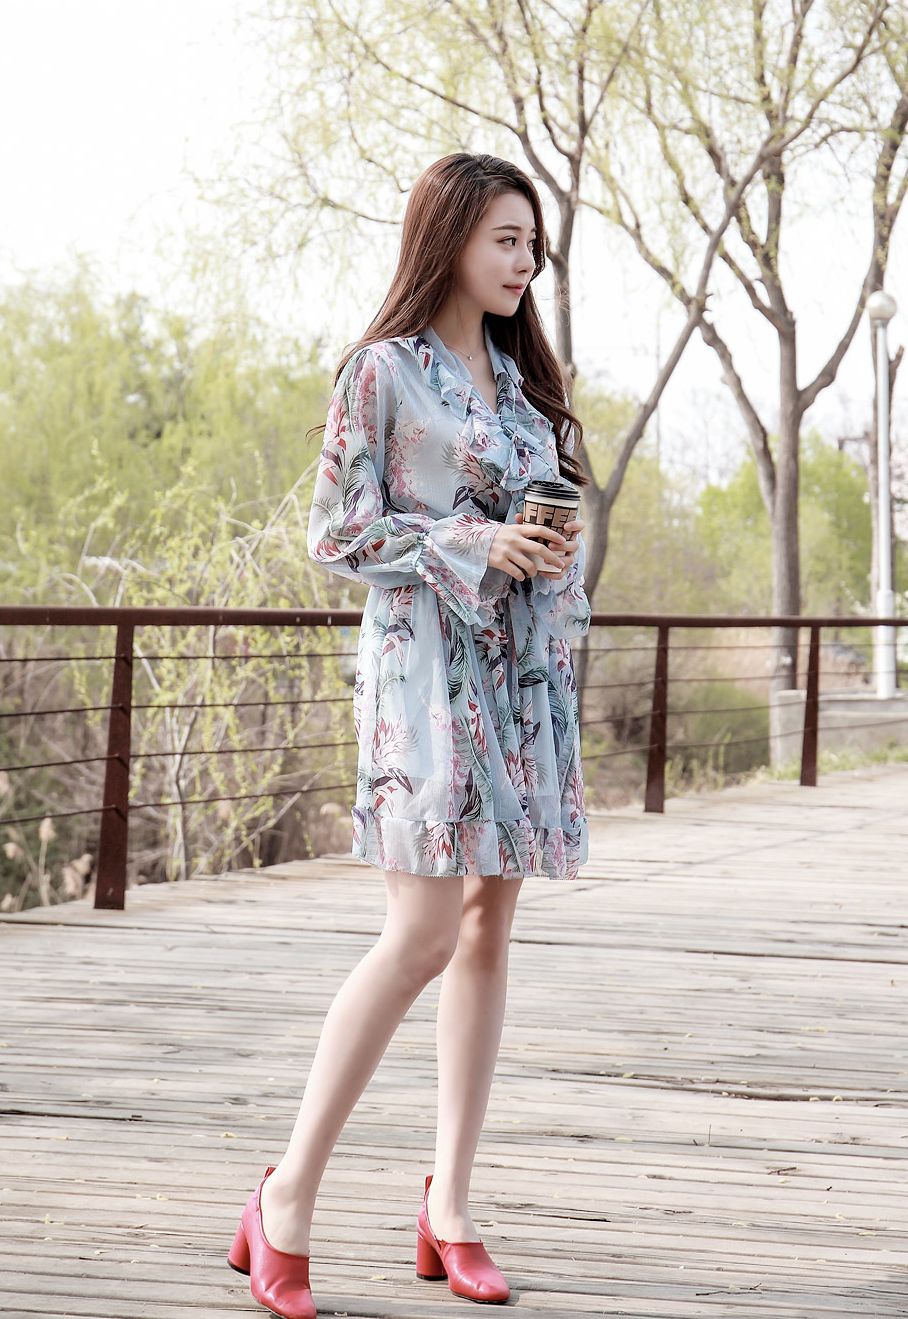 Kim Min Young Street Legs Picture and Photo 1